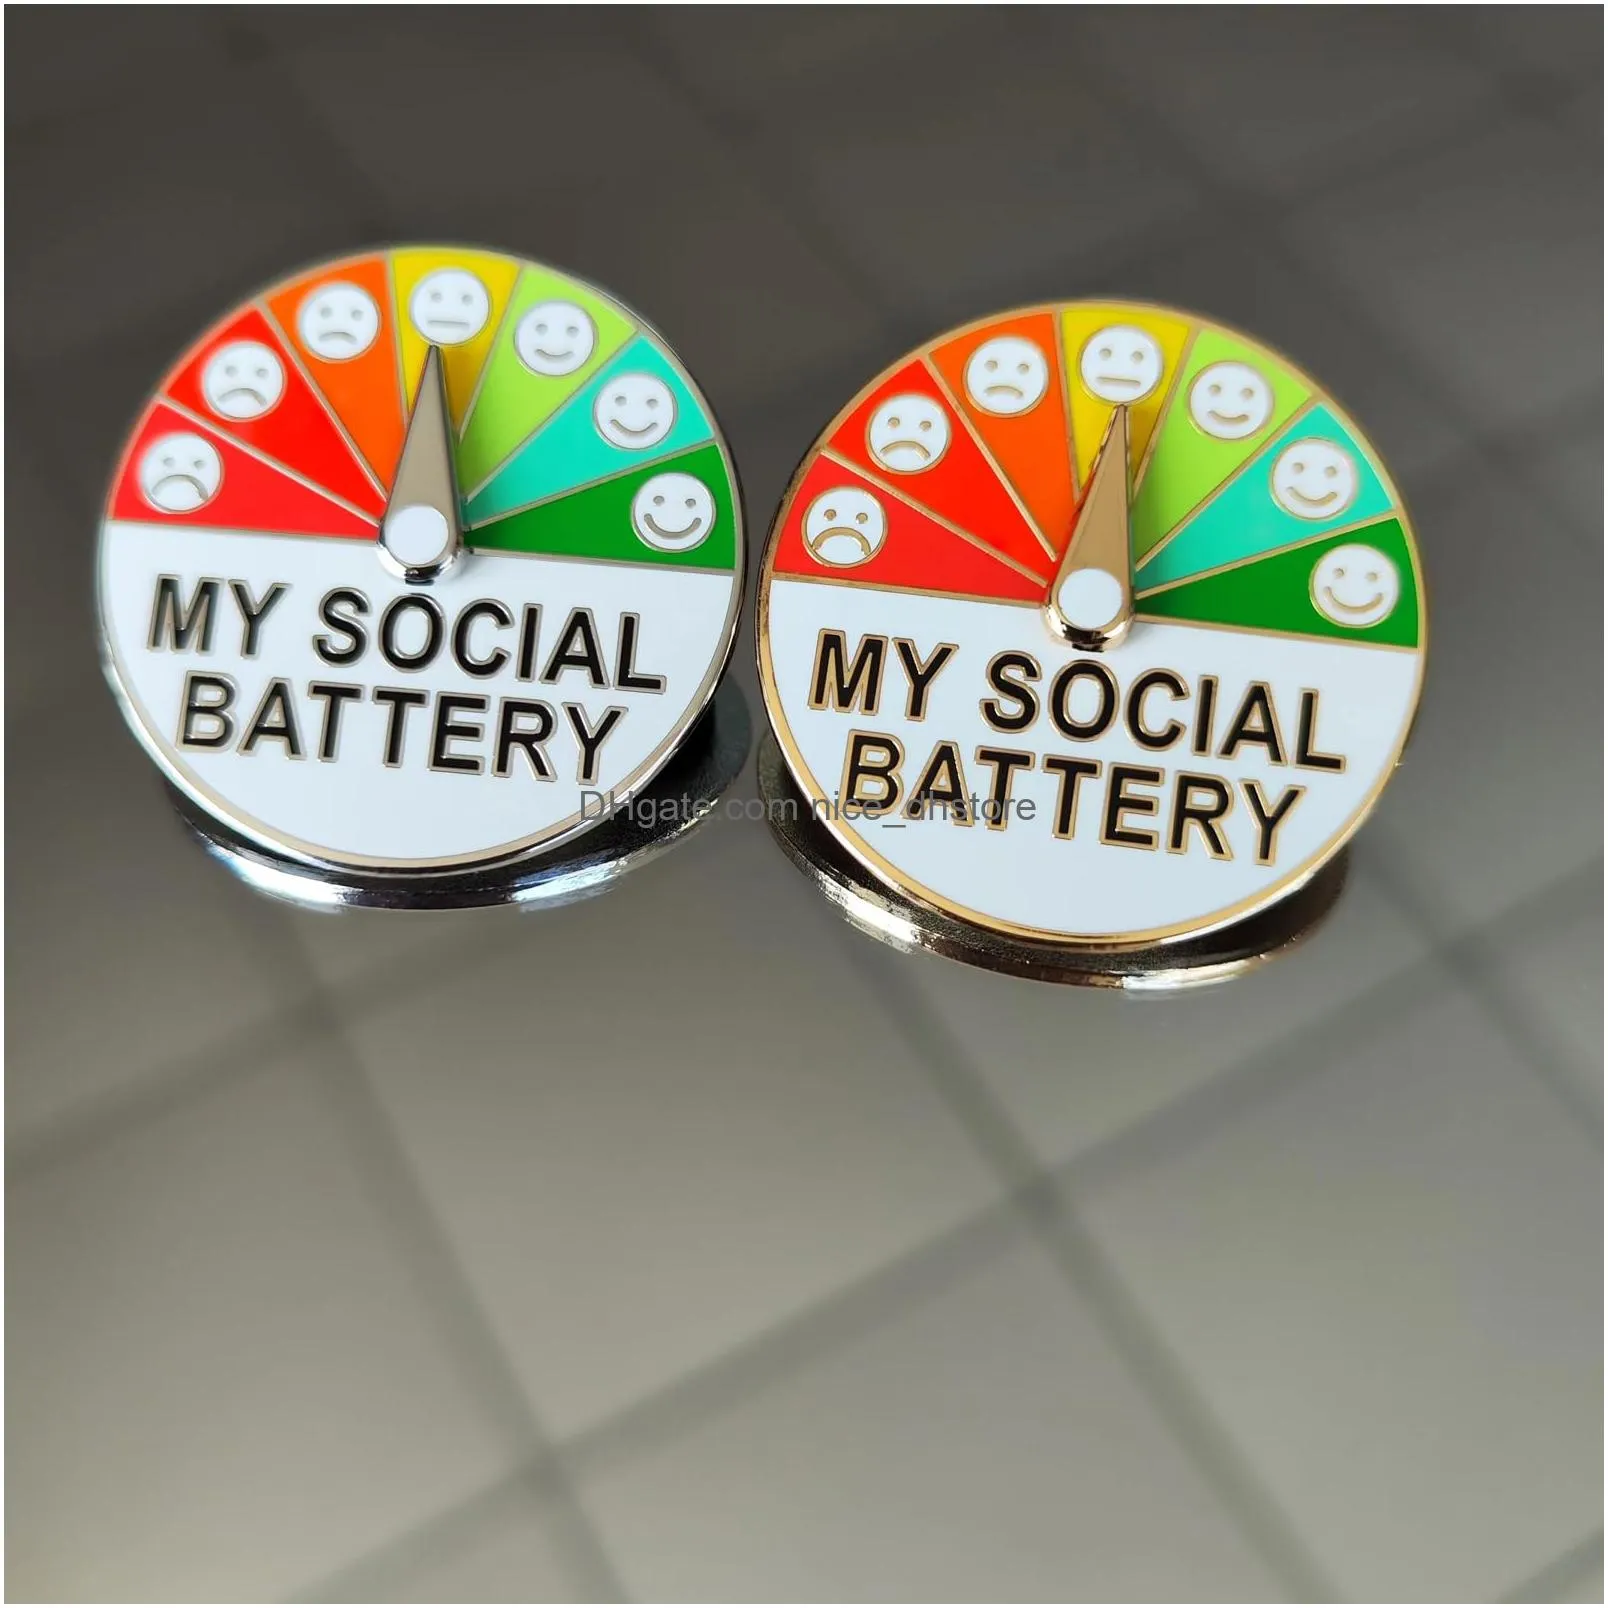 for social battery pin my social battery creative introvert lapel pin 360 rotation creative fun enamel emotional pins emotion mood expressing pins 7 days a week brooch for women men backpack hat